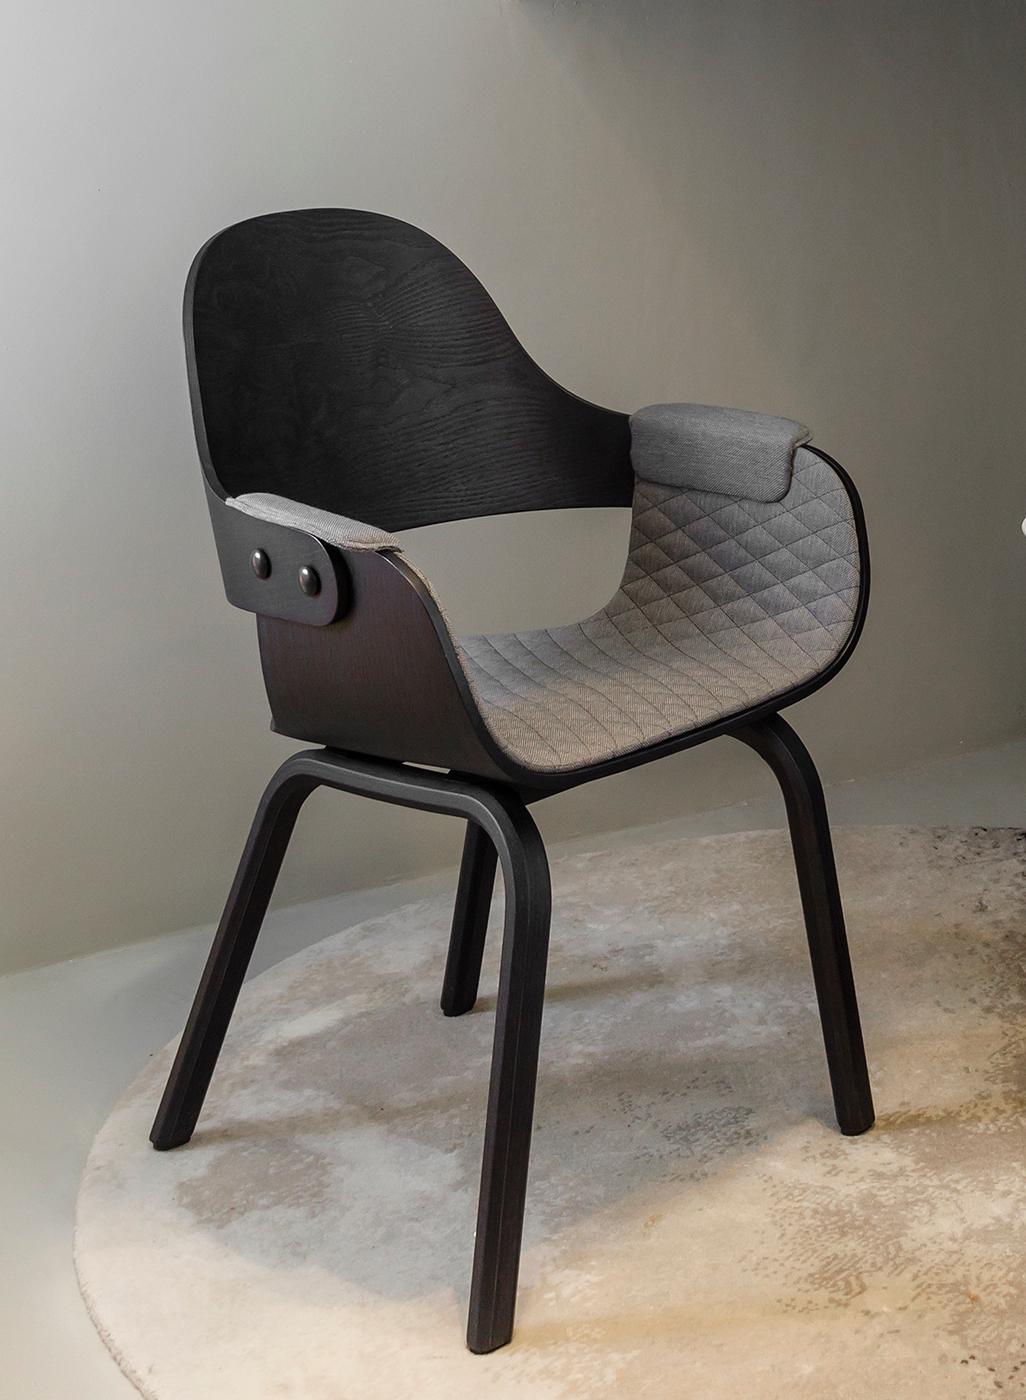 Spanish Showtime chair by Jaime Hayon contemporary office or dining chair black stained For Sale